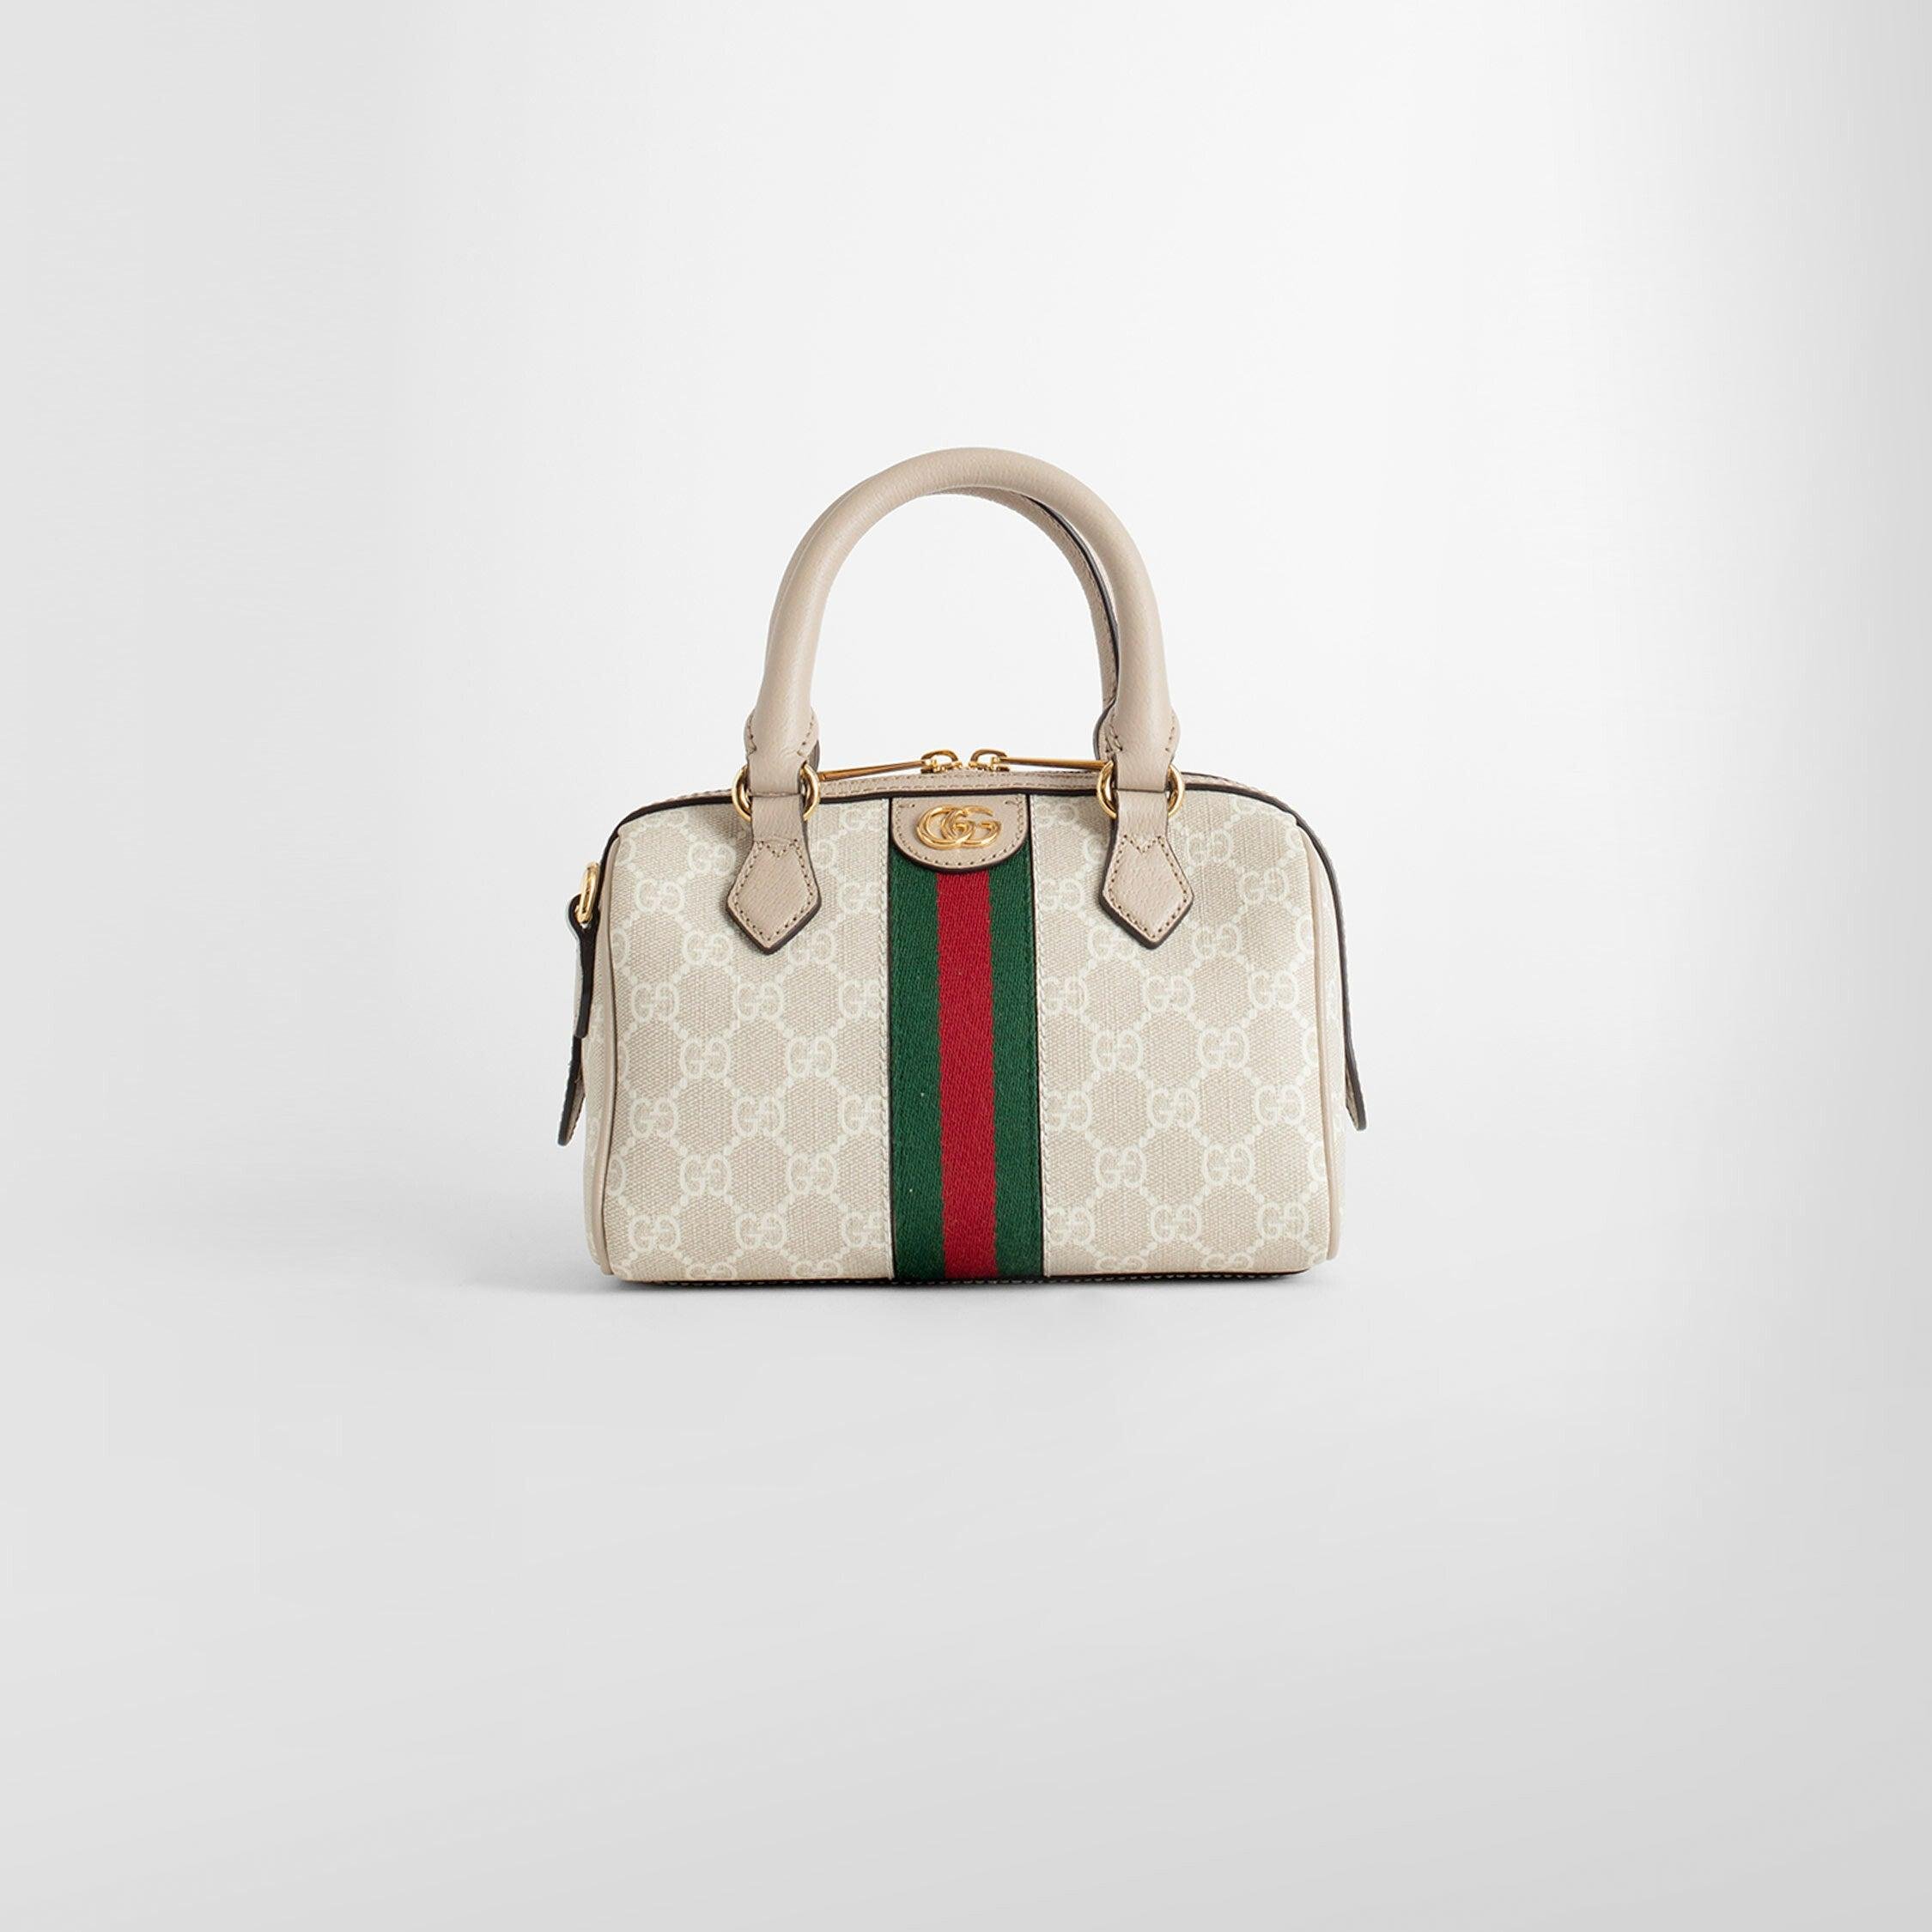 GUCCI WOMAN WHITE TOP HANDLE BAGS by GUCCI